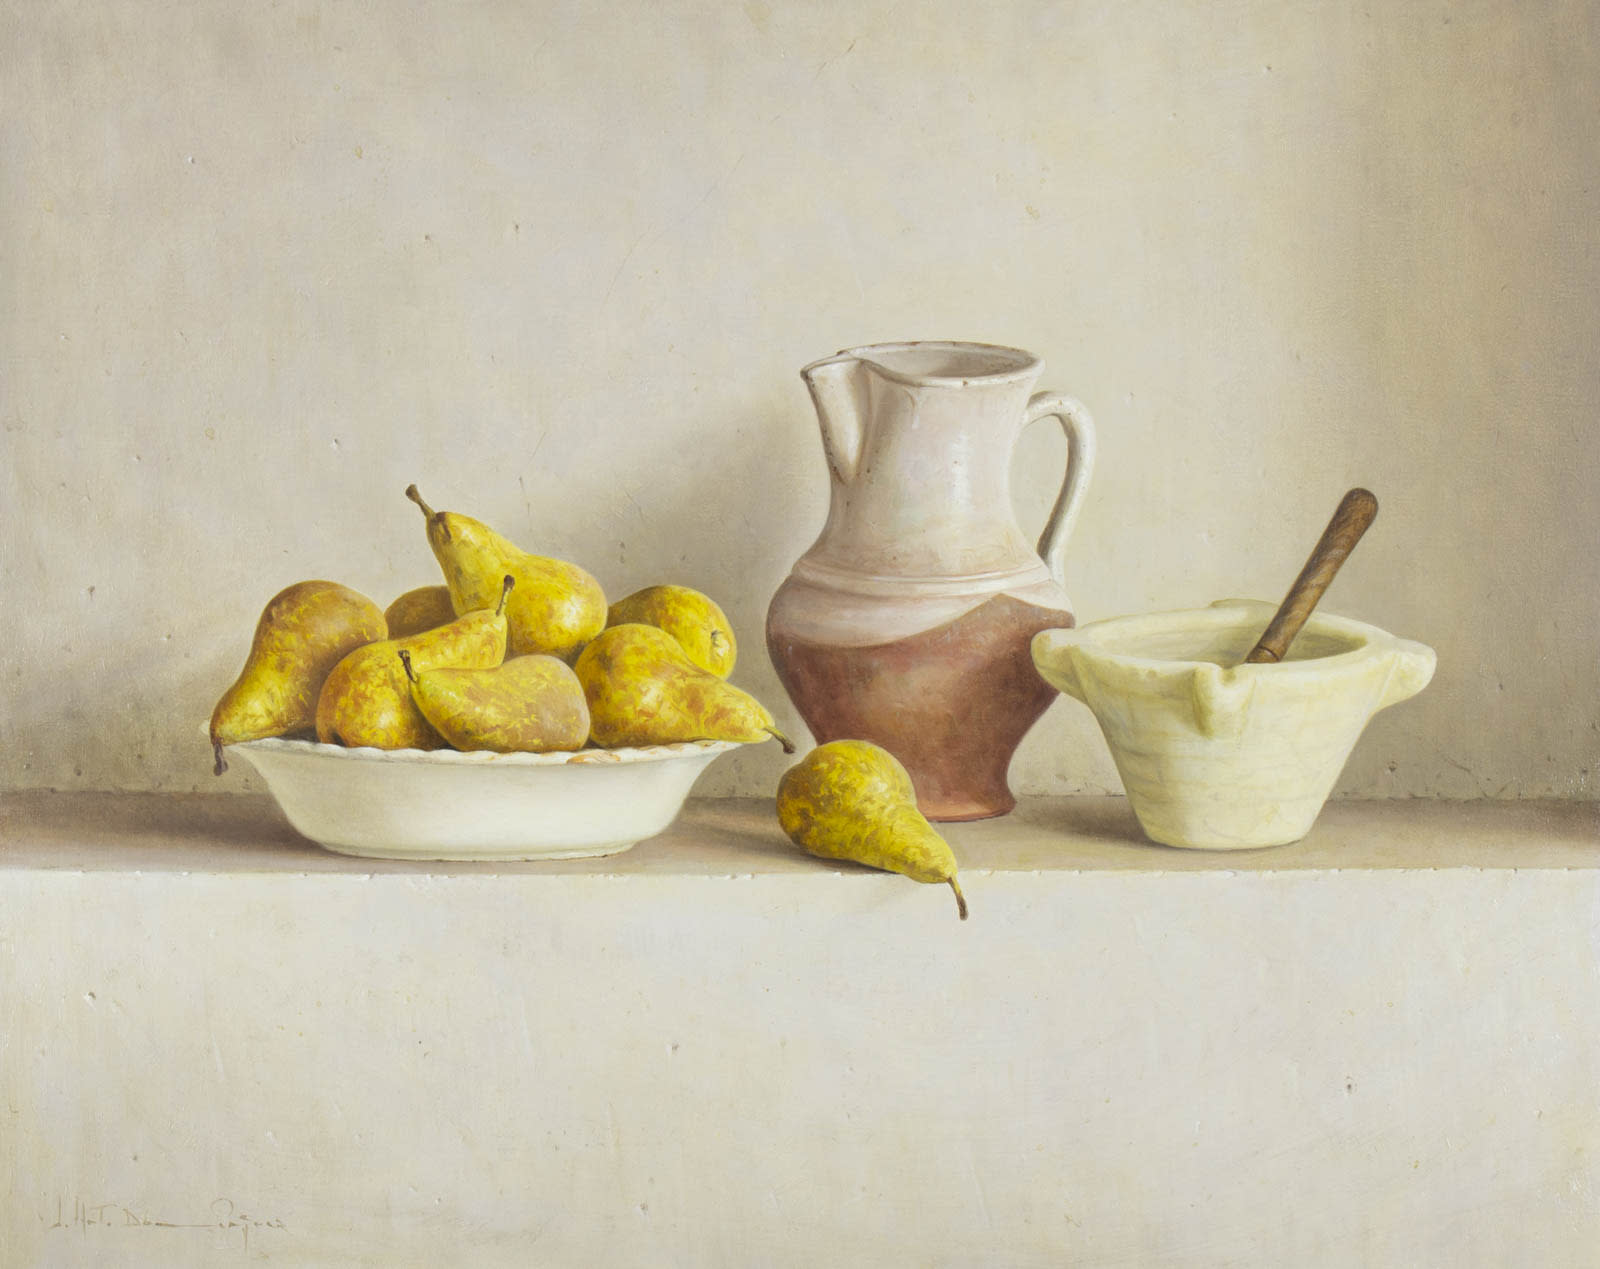 Porcelain, Pears and Stoneware